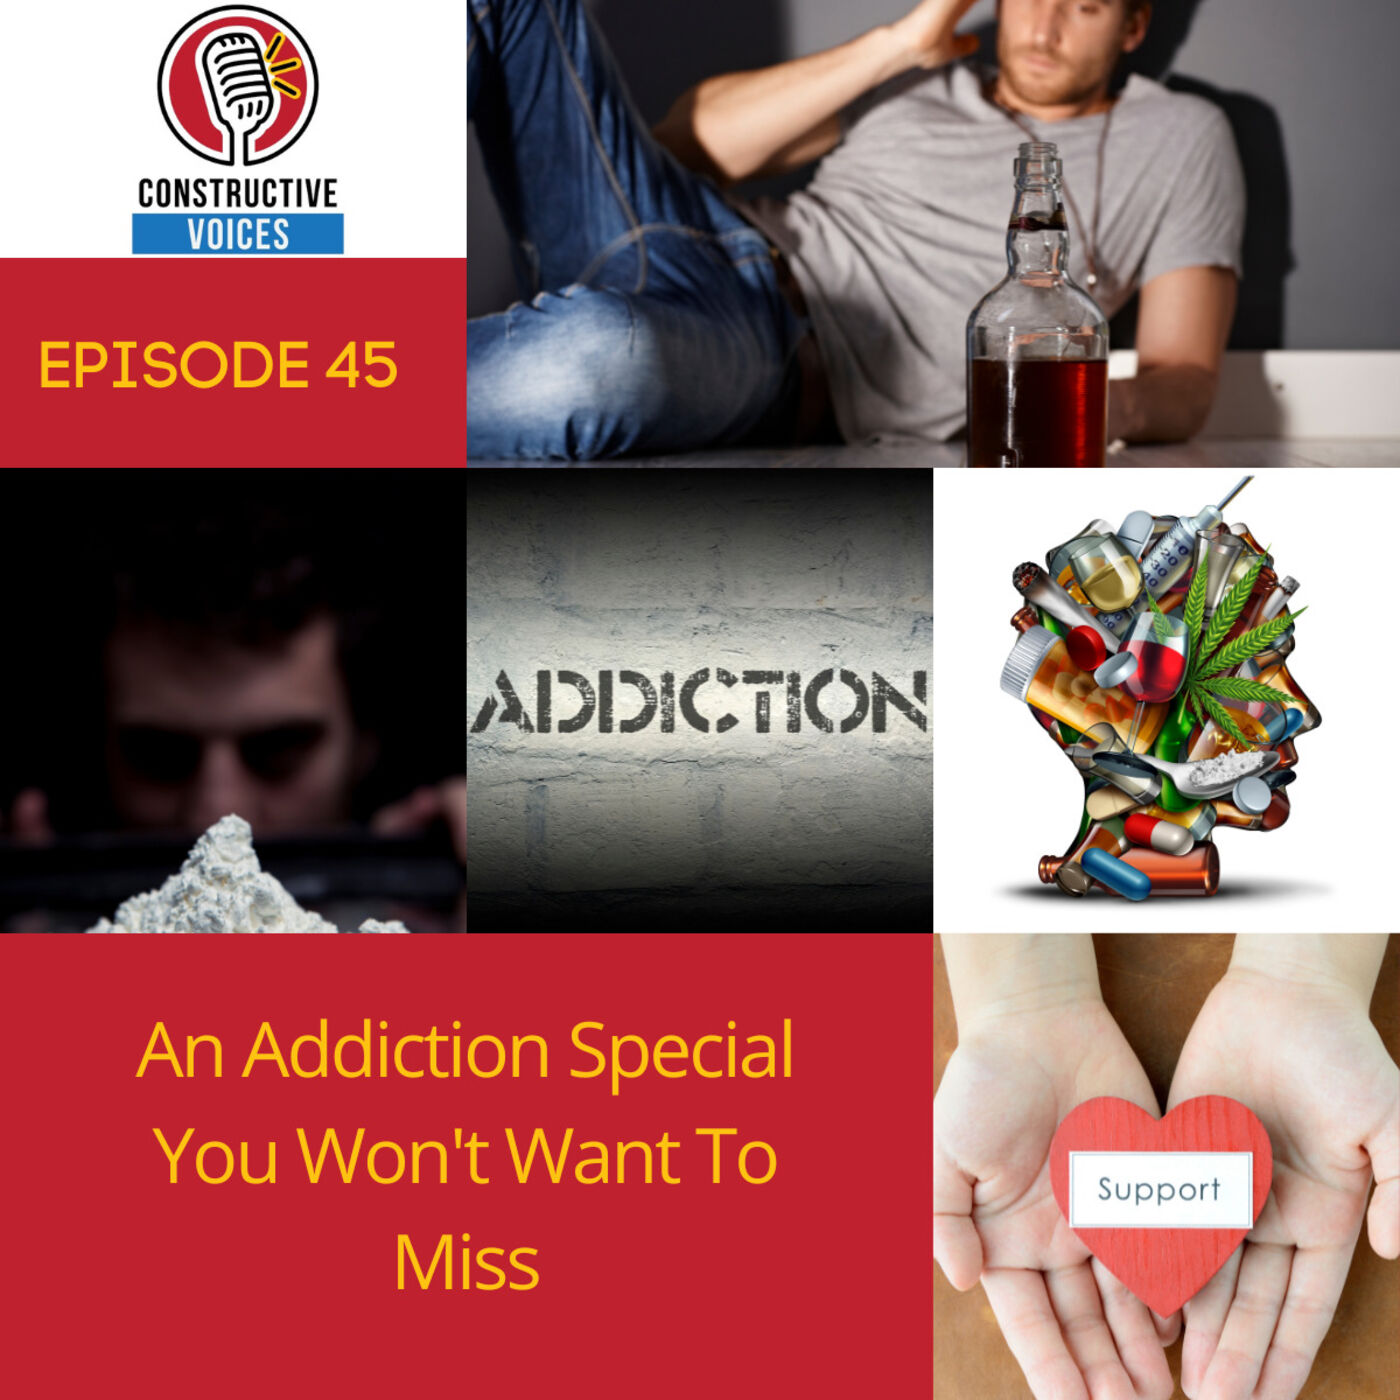 An Addiction Special You Won't Want To Miss